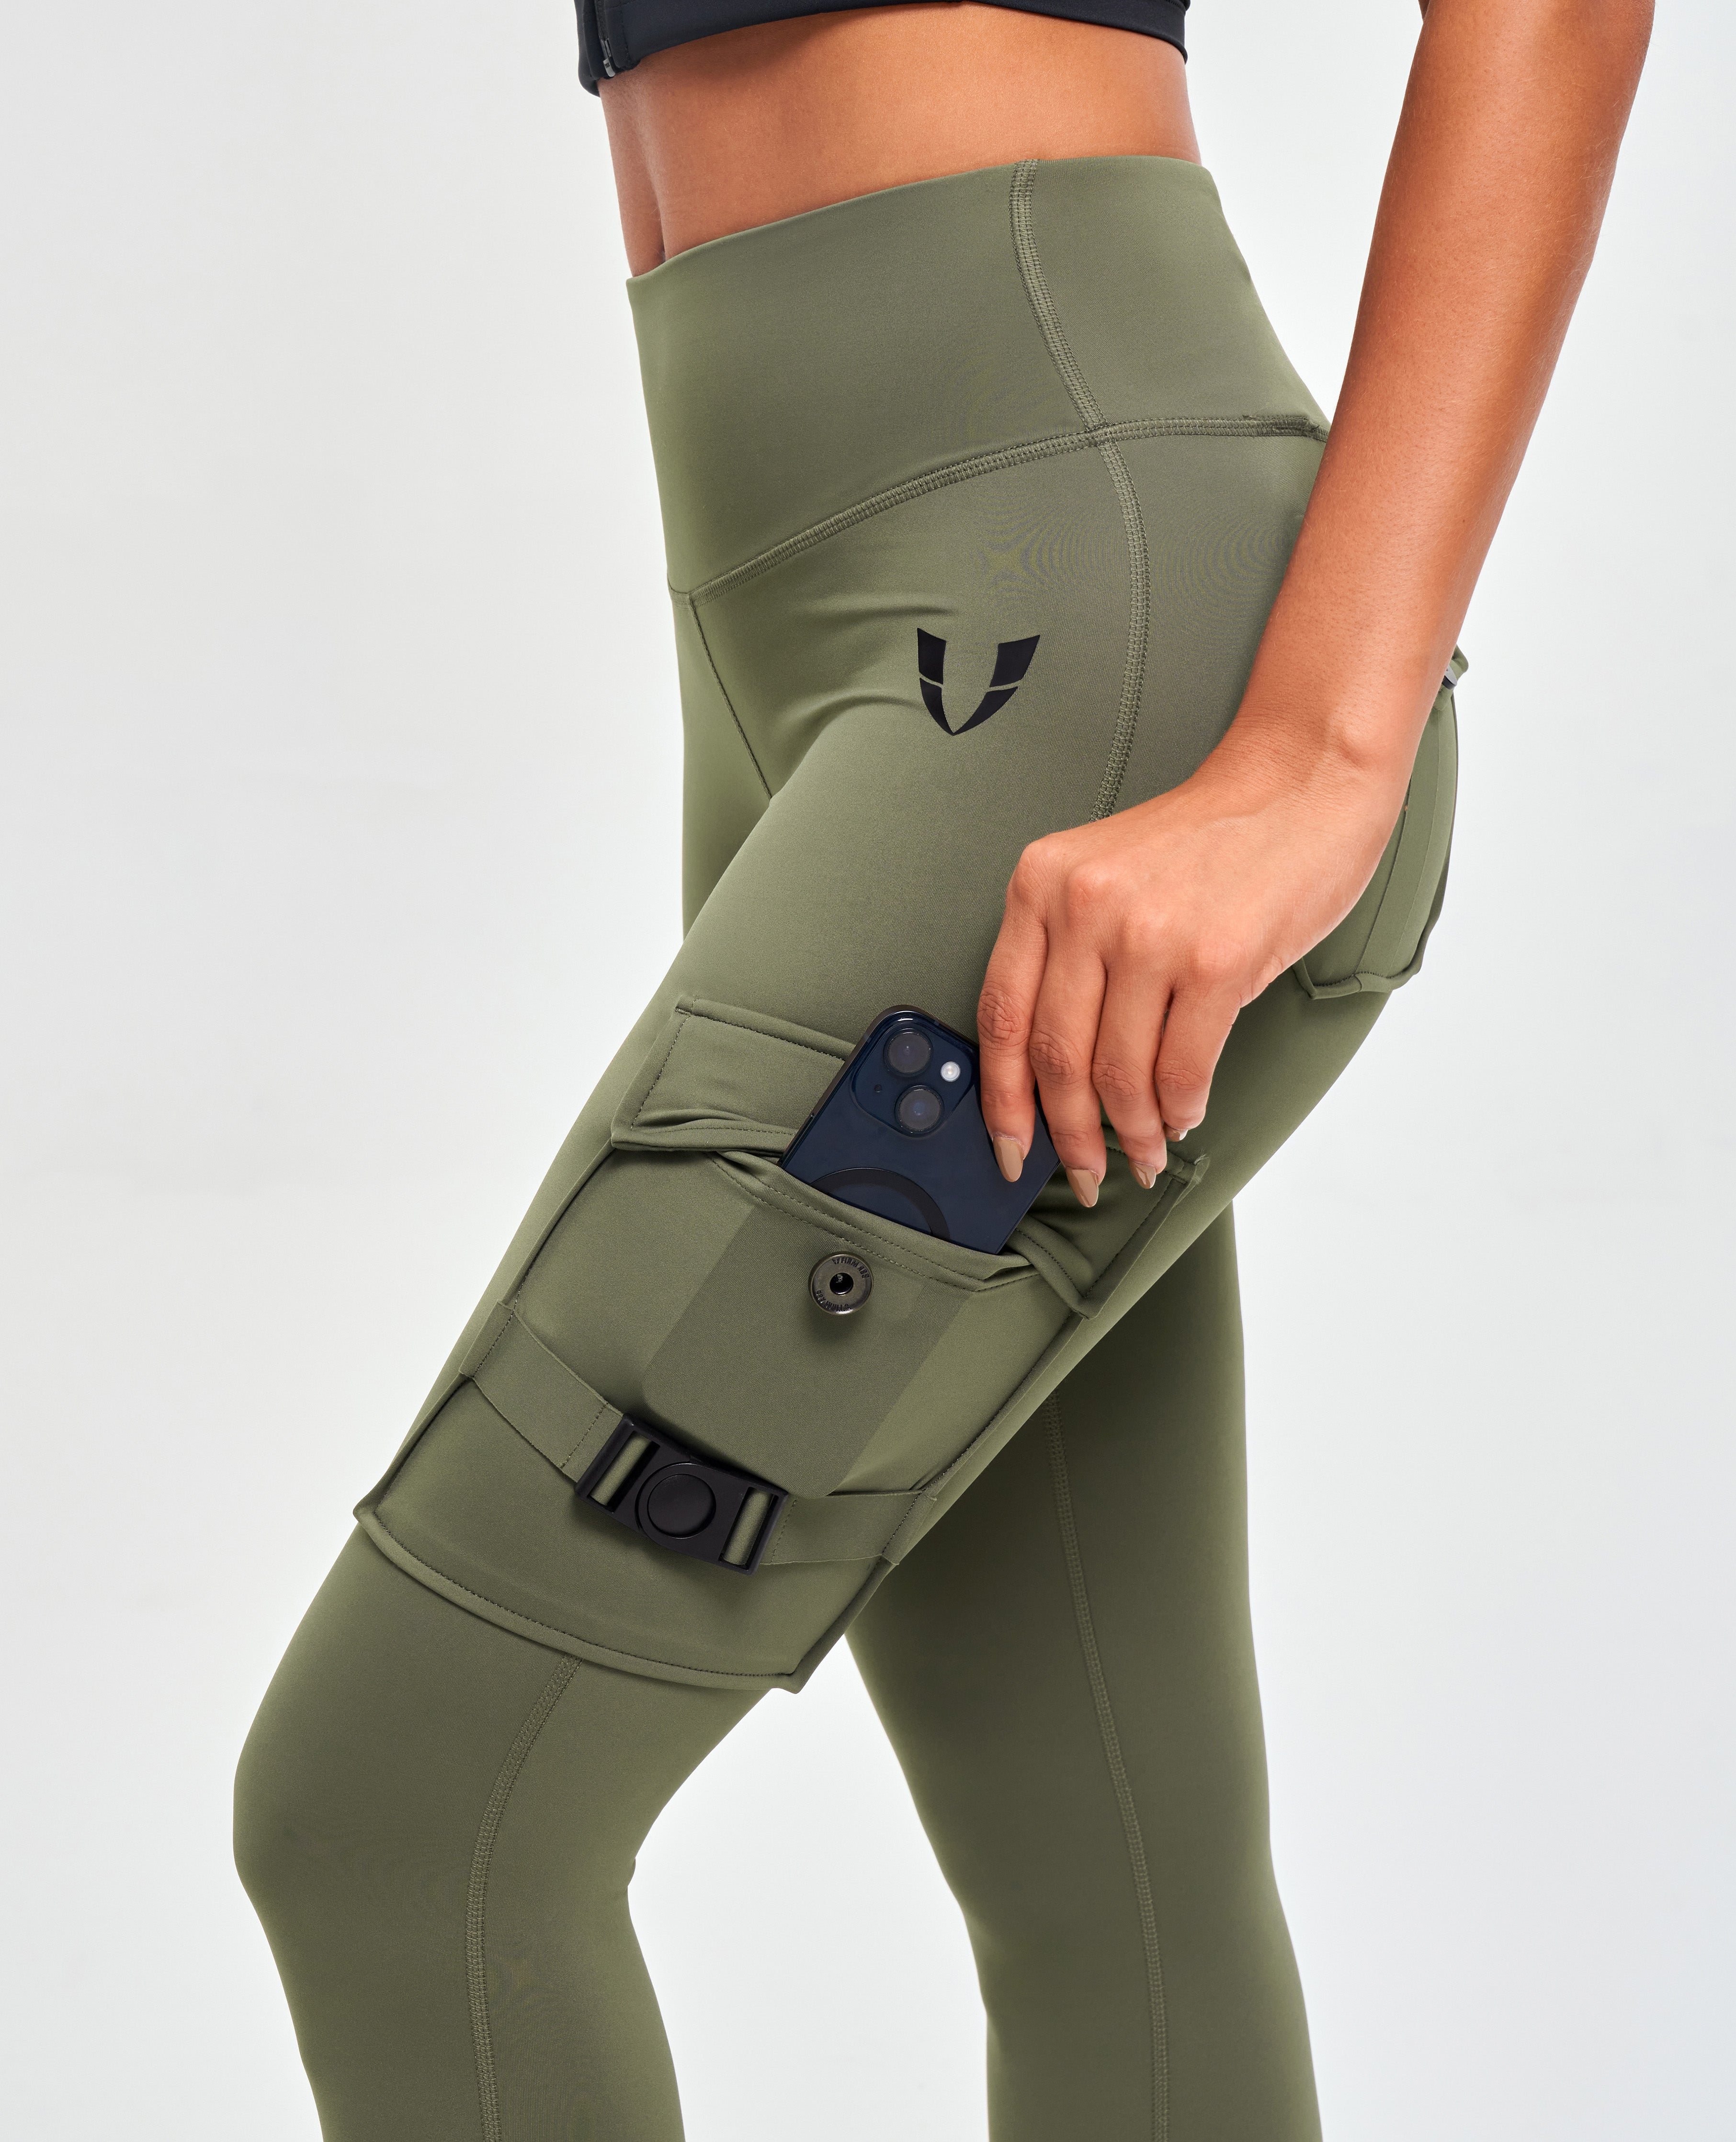 Buy V LOVEFIT Firm ABS Women's Fitness Leggings Seamless Sports Pants  Pocket Running Workout Yoga Tummy Control Trousers (Olive Green, L) at